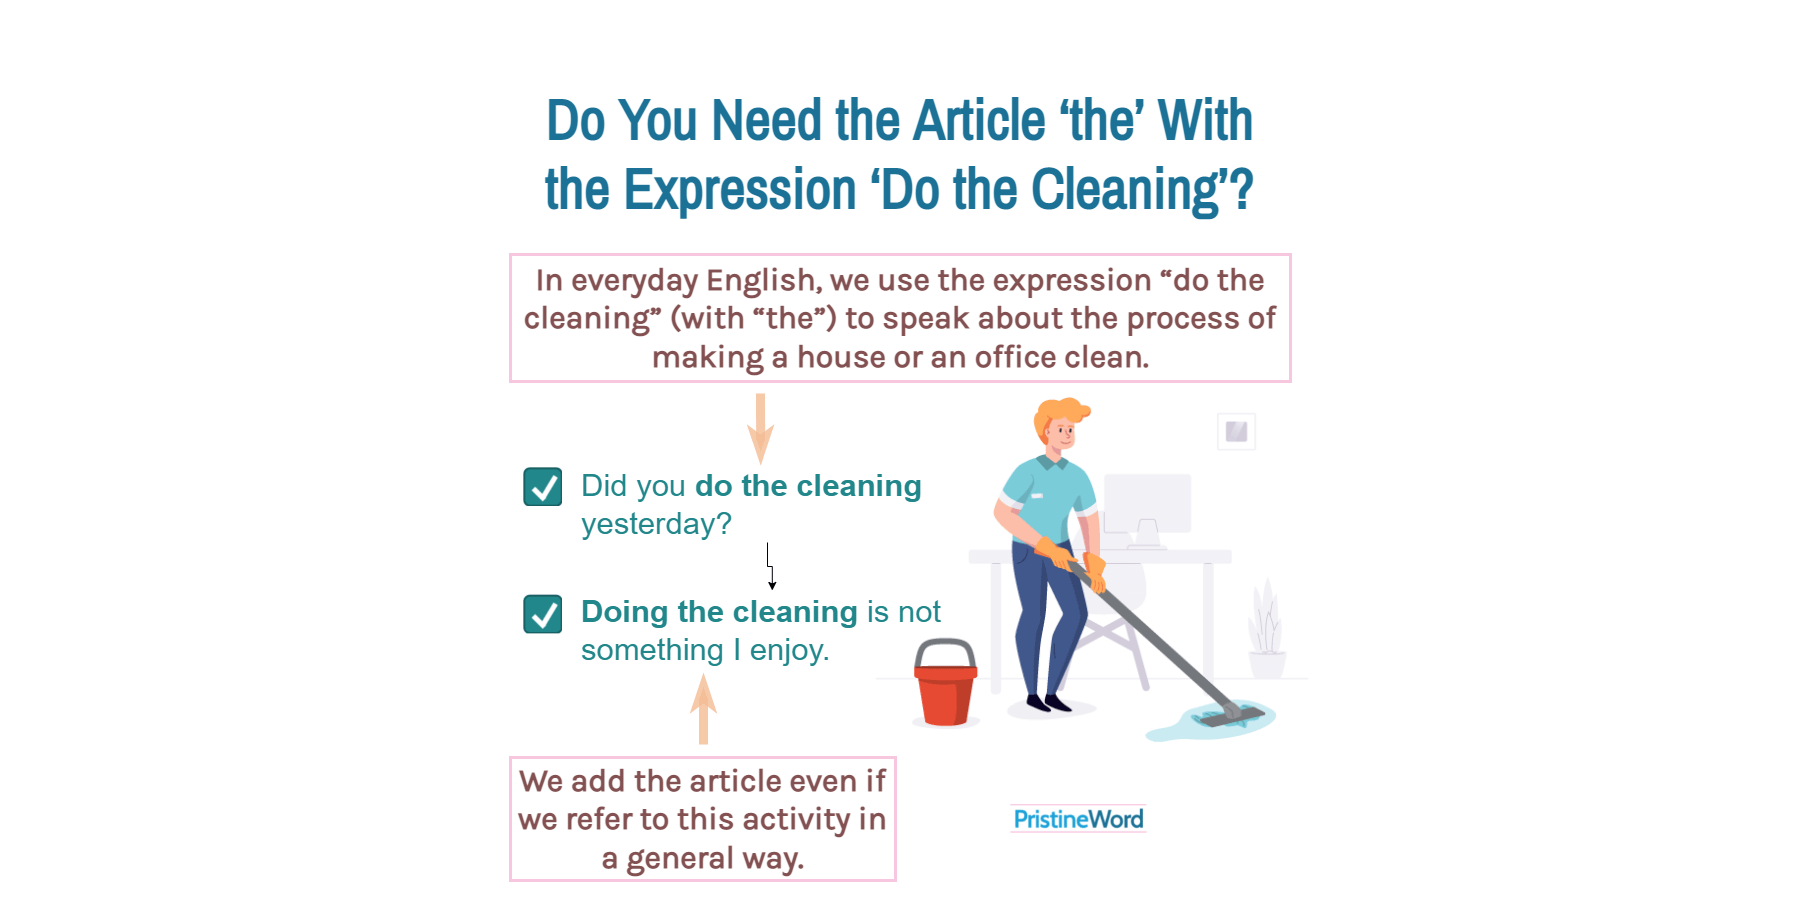 Do You Need the Article ‘the’ With the Expression ‘Do the Cleaning’?